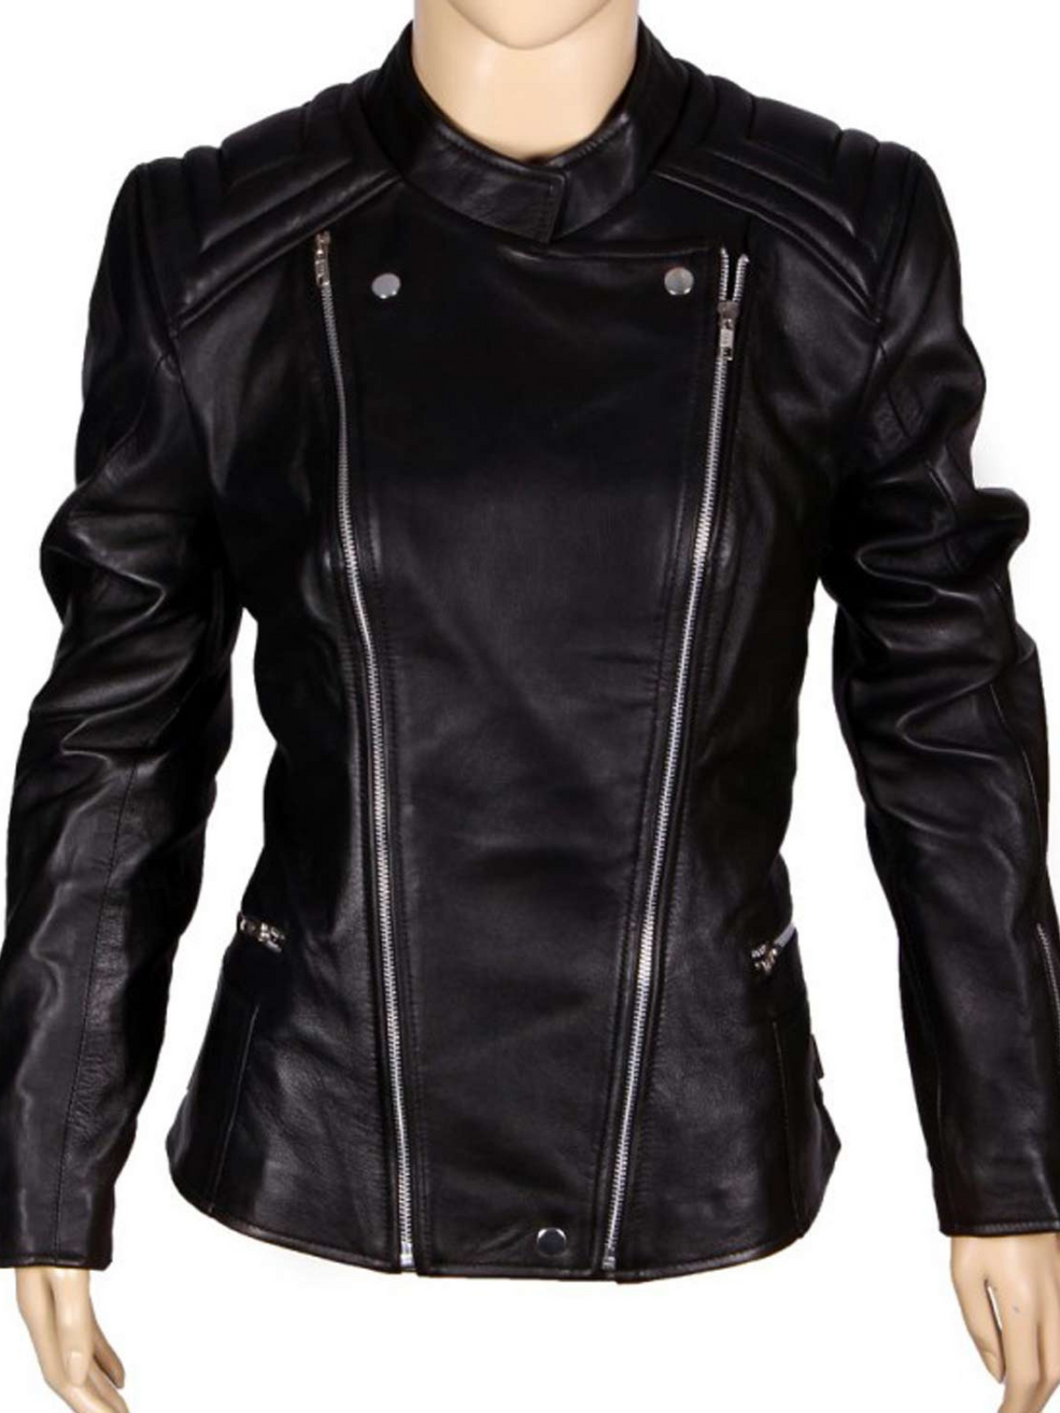 Abbey Crouch Leather Black Jacket